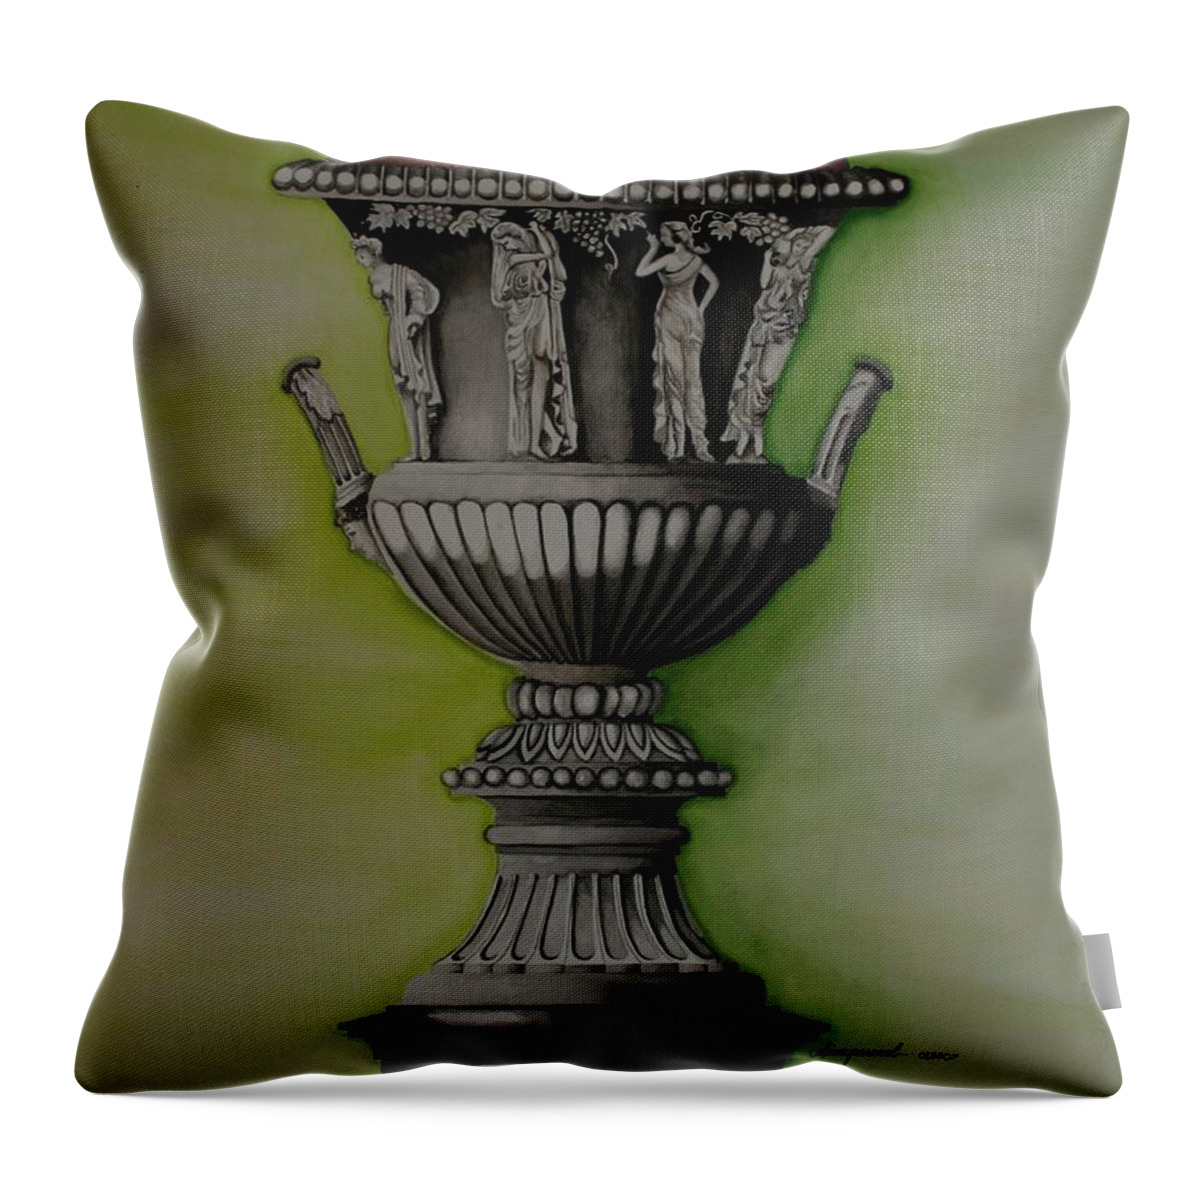 Amphora Throw Pillow featuring the painting Amphora by Olive Pascual